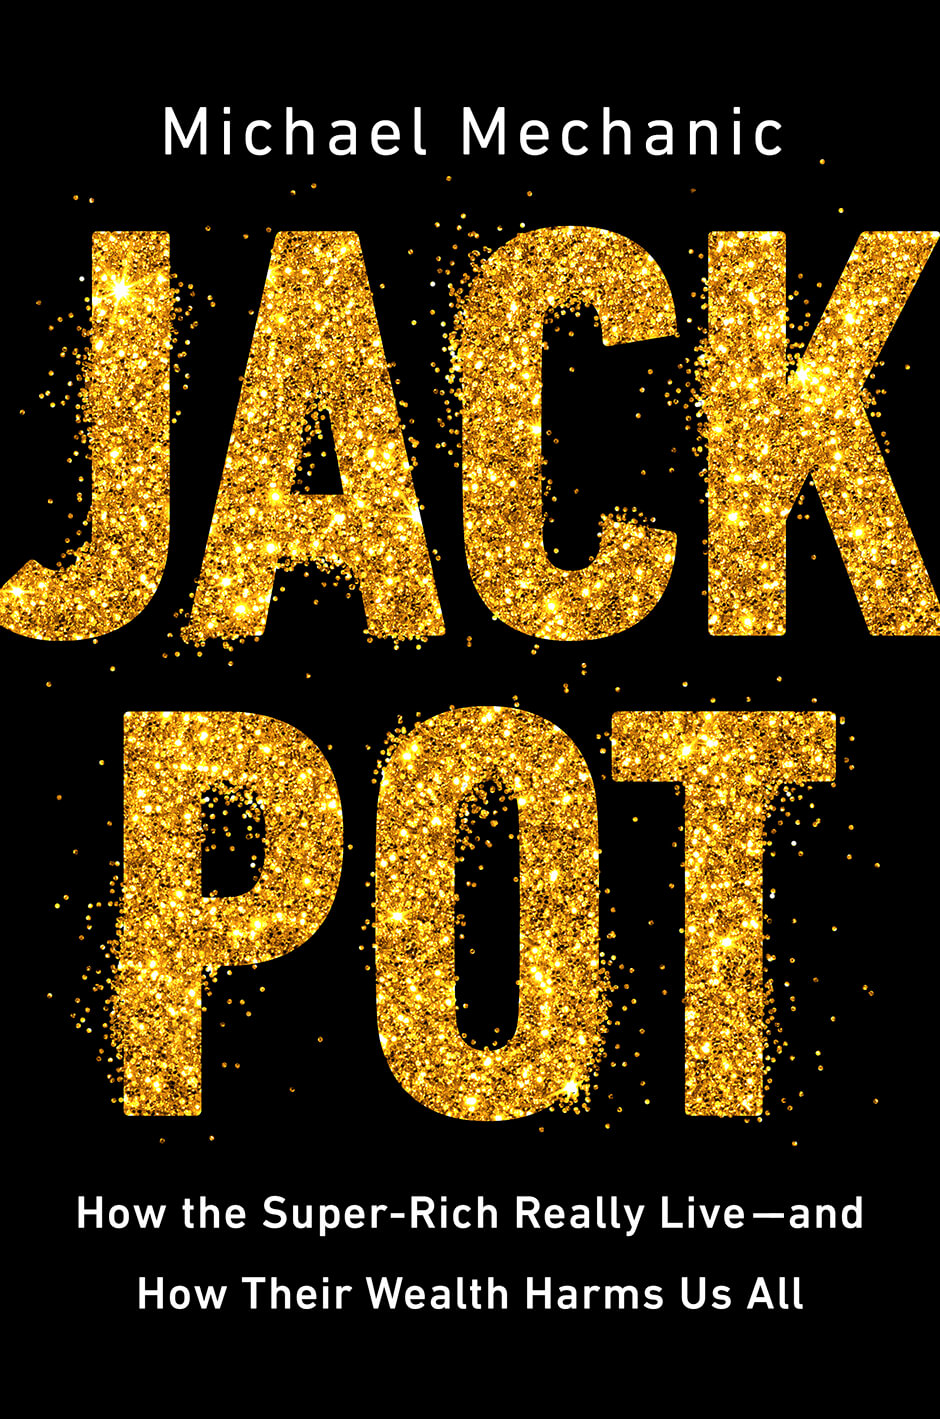 Jackpot: How the Super-Rich Really Live—and How Their Wealth Harms Us All - Progressive jackpot